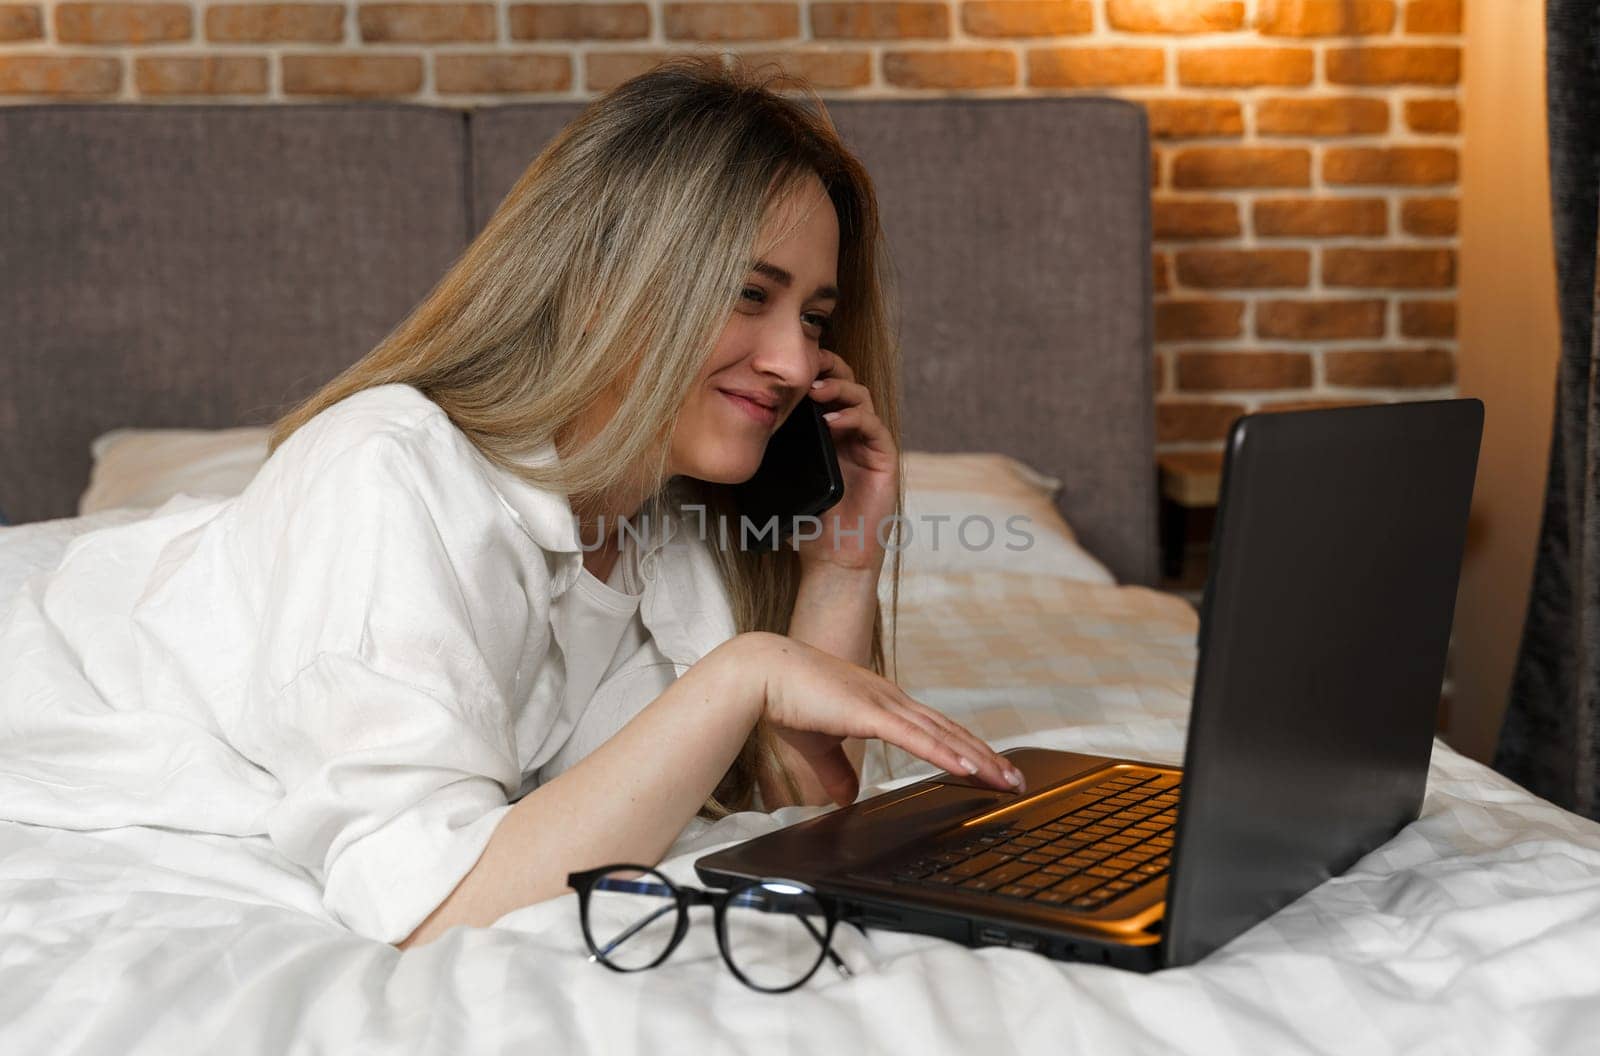 A young beautiful woman is lying on the bed, talking on the phone, looking into a laptop.